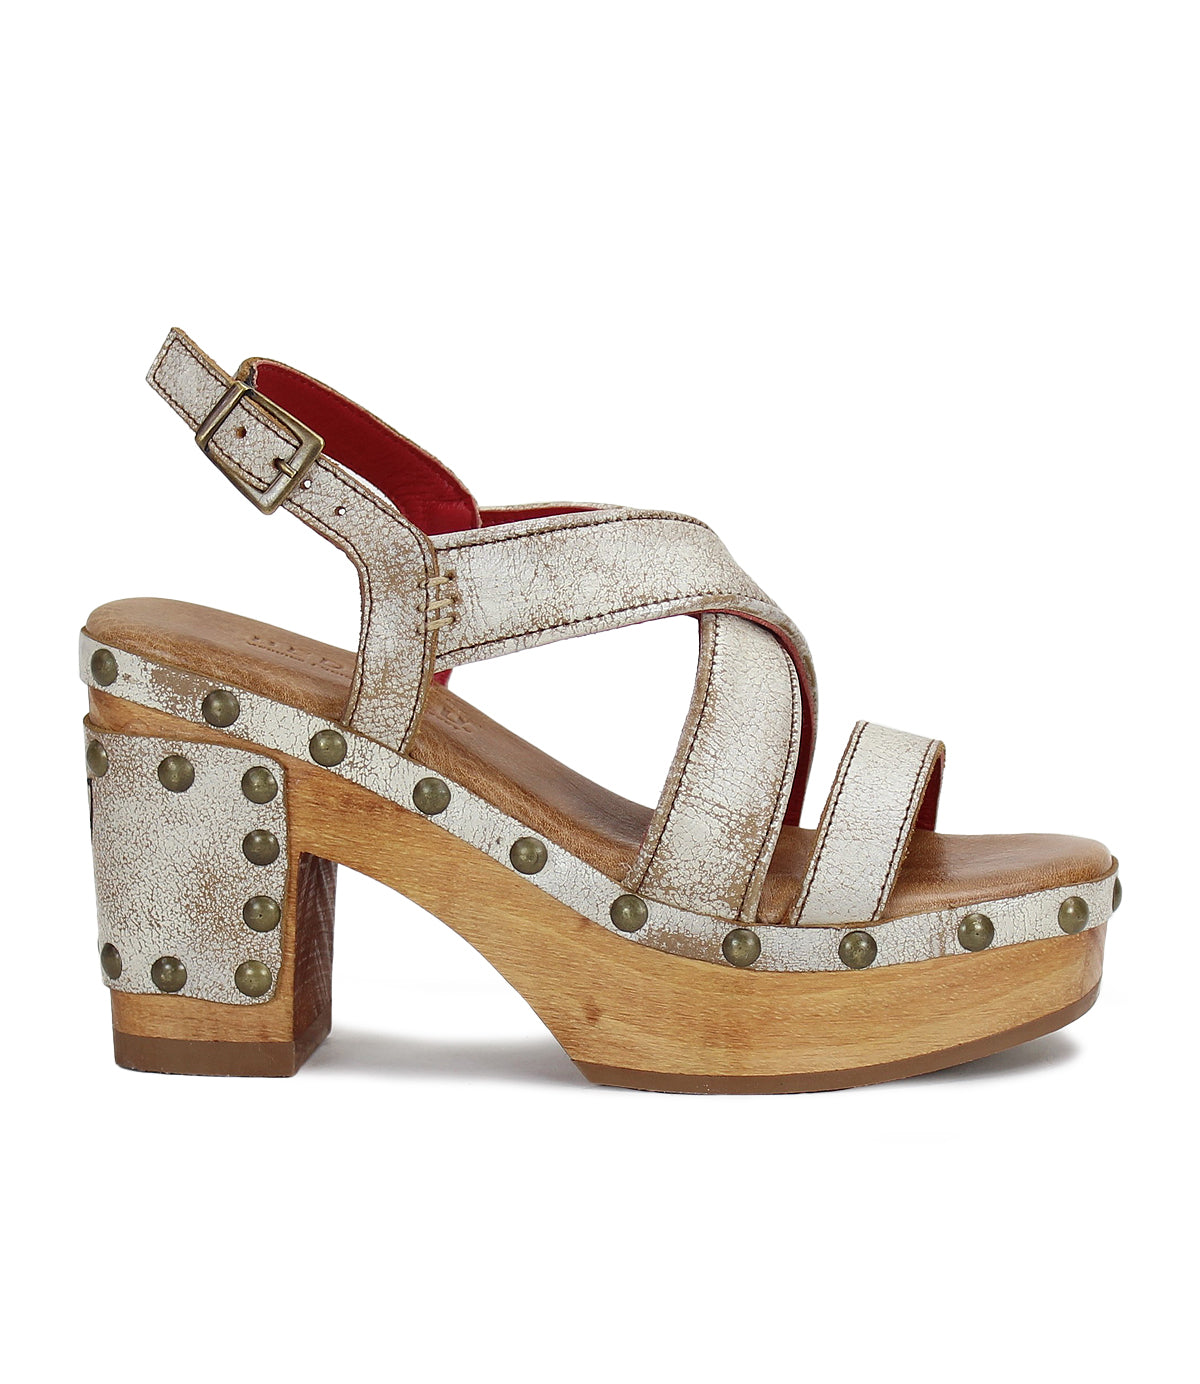 A comfortable white Mediation sandal with studs on it from Bed Stu.